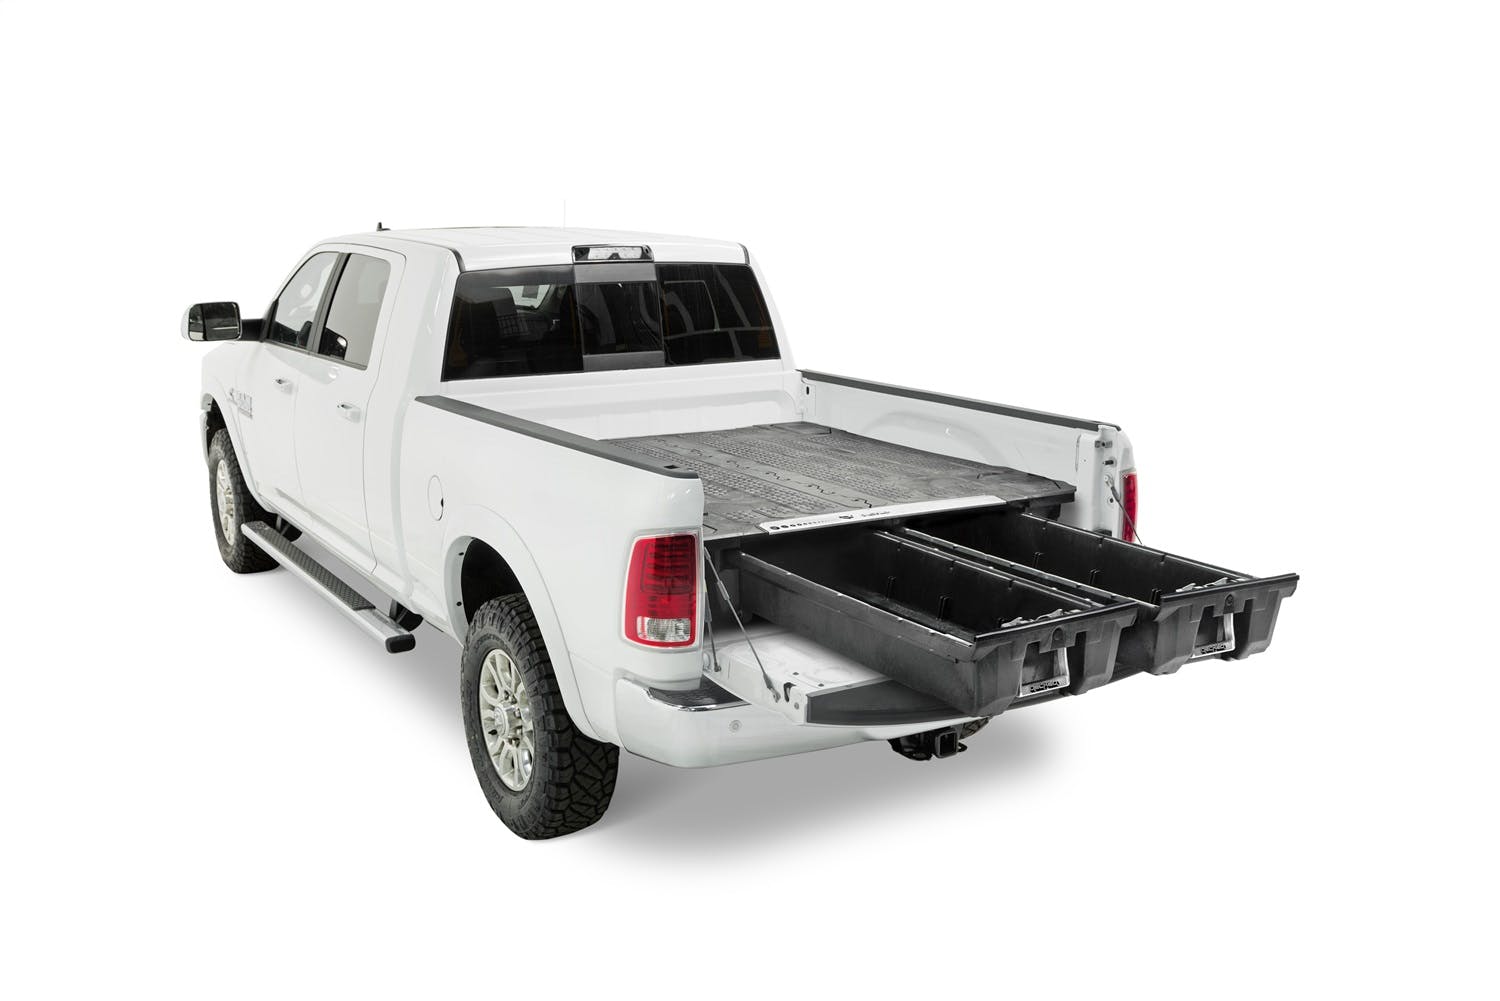 DECKED DR4 75.25 Two Drawer Storage System for A Full Size Pick Up Truck